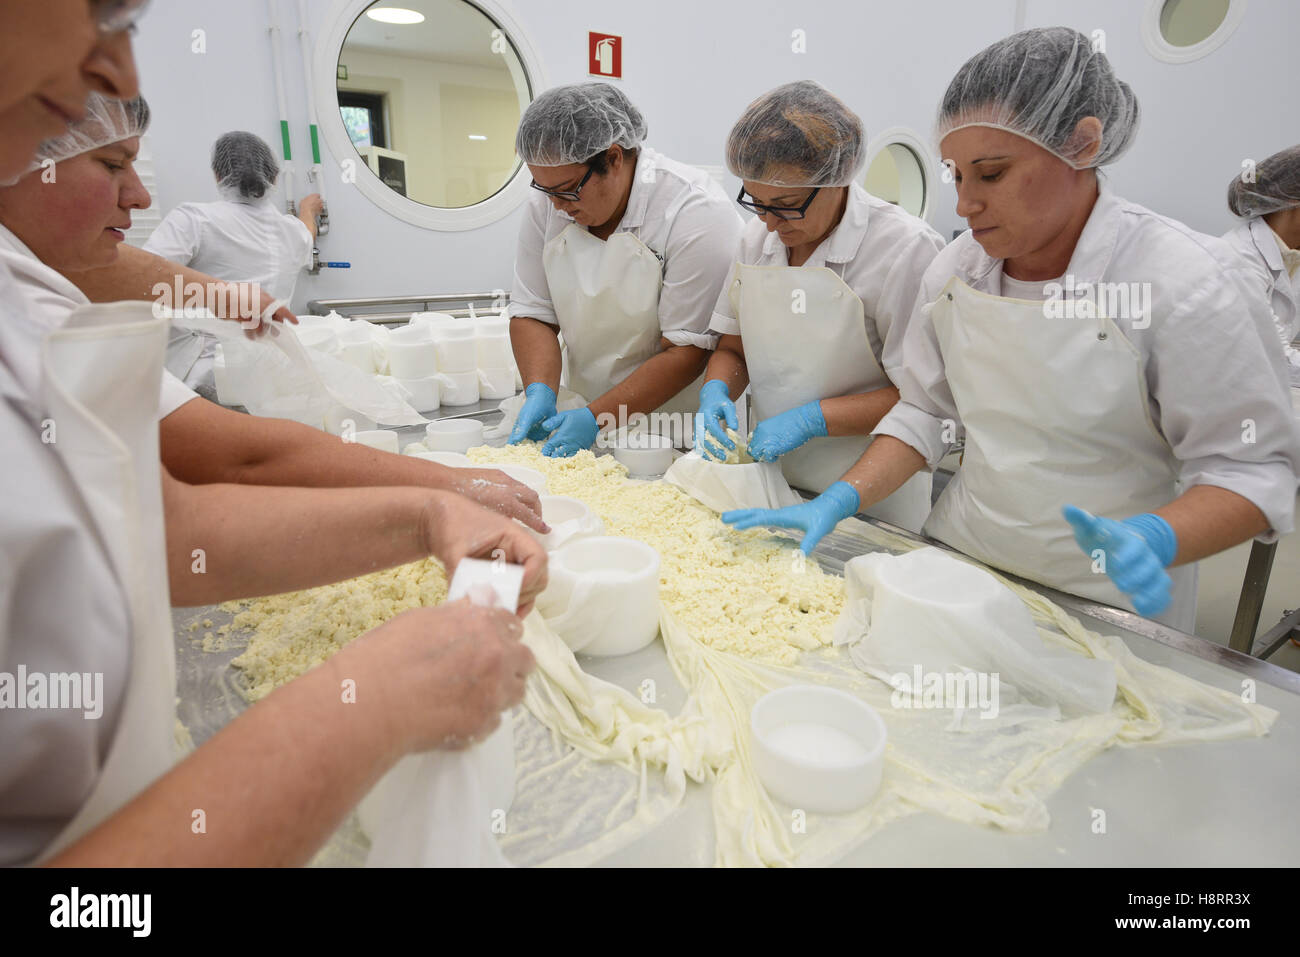 Workers at a Queijo da Serra cheese factory in Portugal Stock Photo